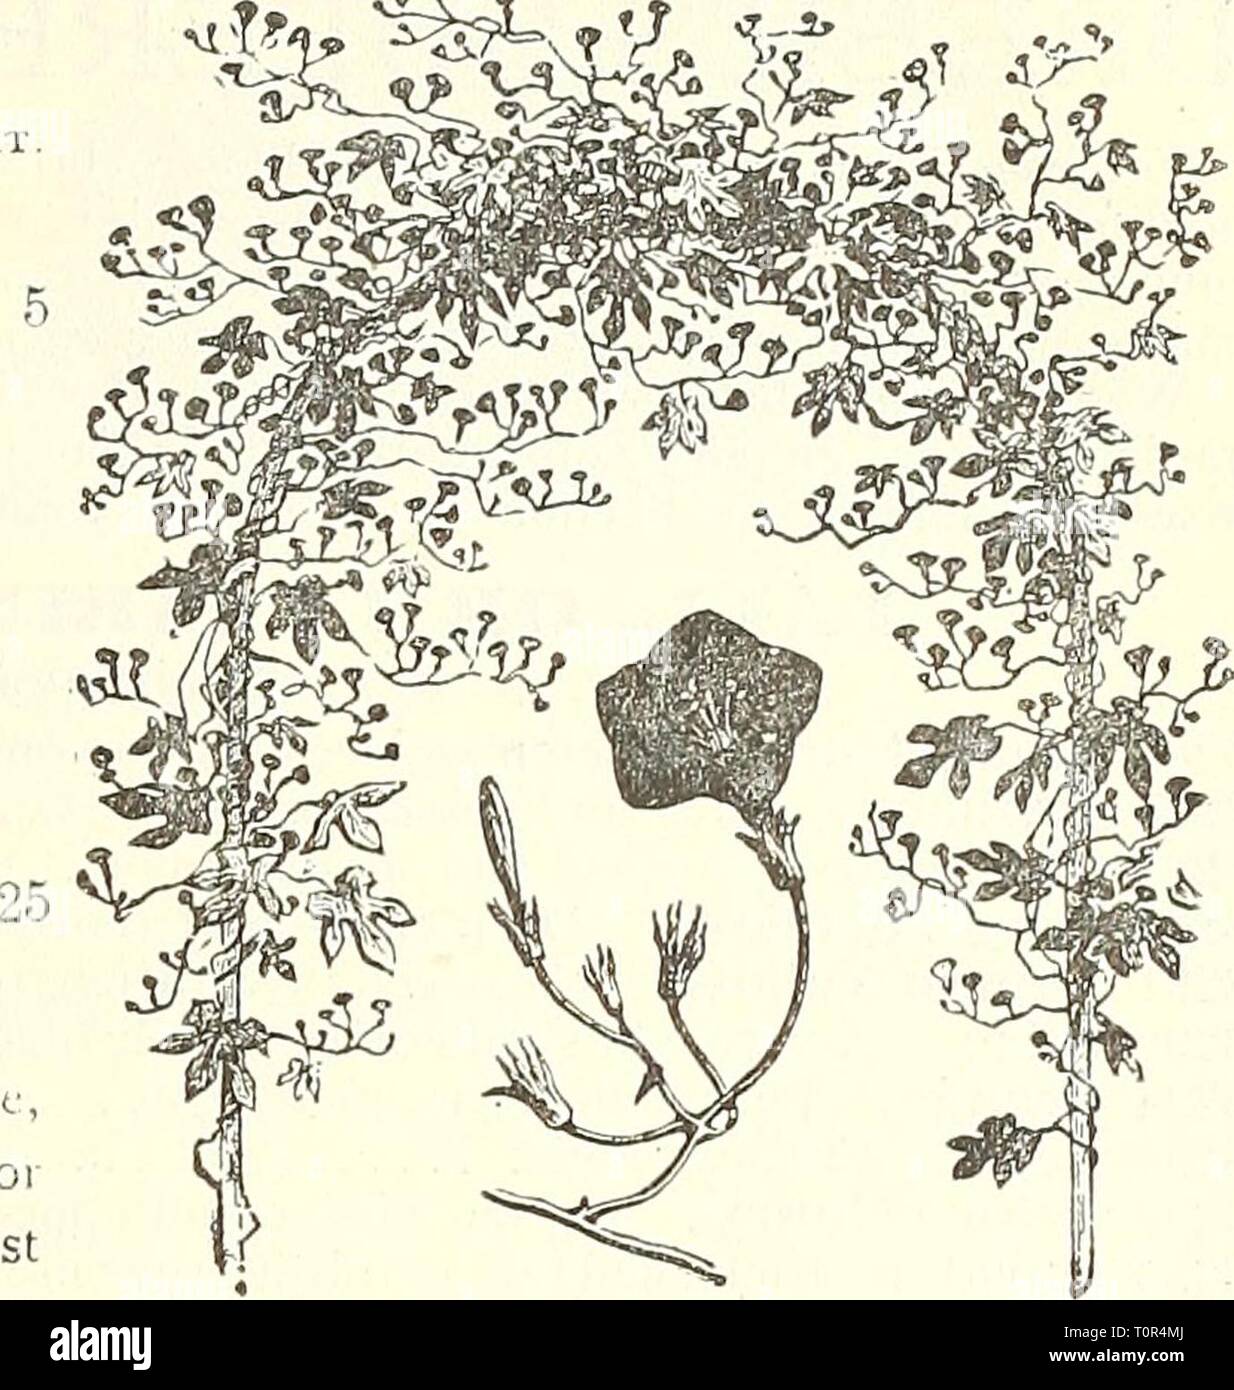 Dreer's garden book  1904 Dreer's garden book : 1904  dreersgardenbook1904henr Year: 1904  '^^^V^'r^,. W- MiMULUS TiGRltlUS.    Fine PER PKT. mixed spotted 3192 Tigrinus {Monkey Flower). vai leties 5 3191 rioschatus [Musk Plant). Fine for hanging-bas- kets, etc.; small yellow flowers, fragrant foliage 5 MINA. PER PKT 3201 Lobata. Half-hardy Mexi- can climbing annual. The buds are at first of a vivid red, but turn to orange-yellow be- fore they open, and when fully expanded the flowers are of a creamy-white shade. They are freely produced from the base to the summit of the plant, which attains  Stock Photo